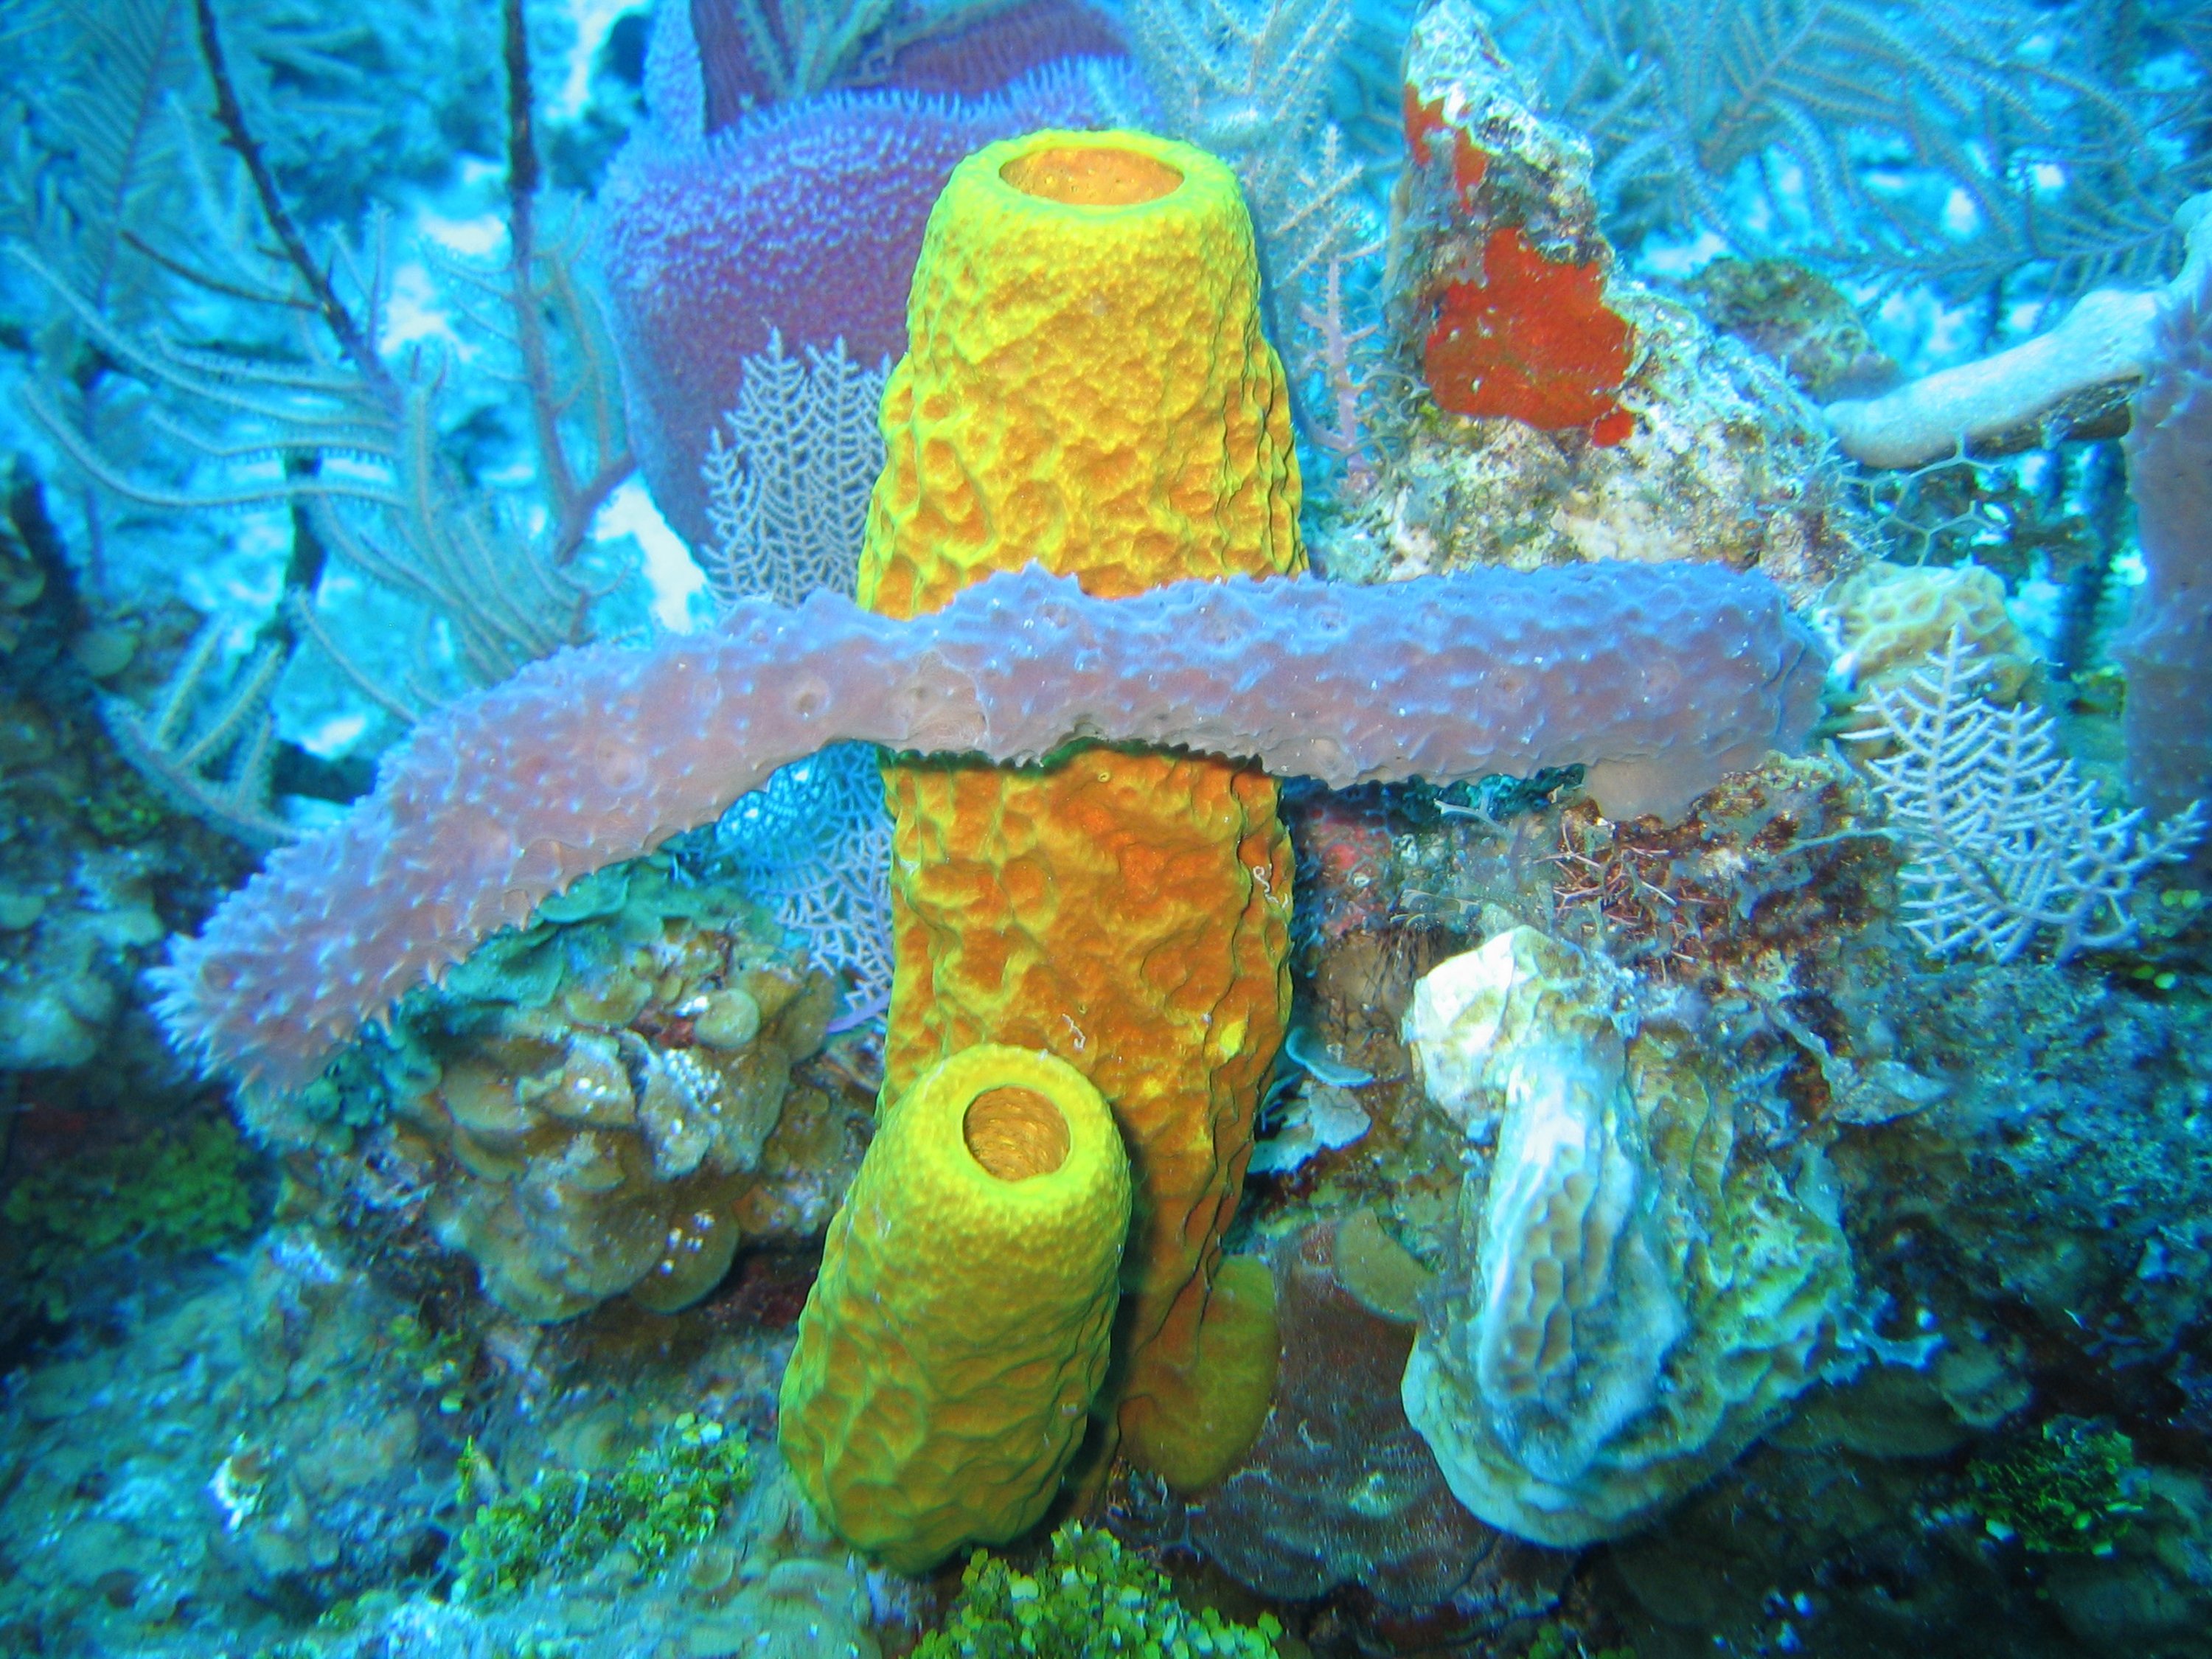 Reef3859 - Flickr - NOAA Photo Library